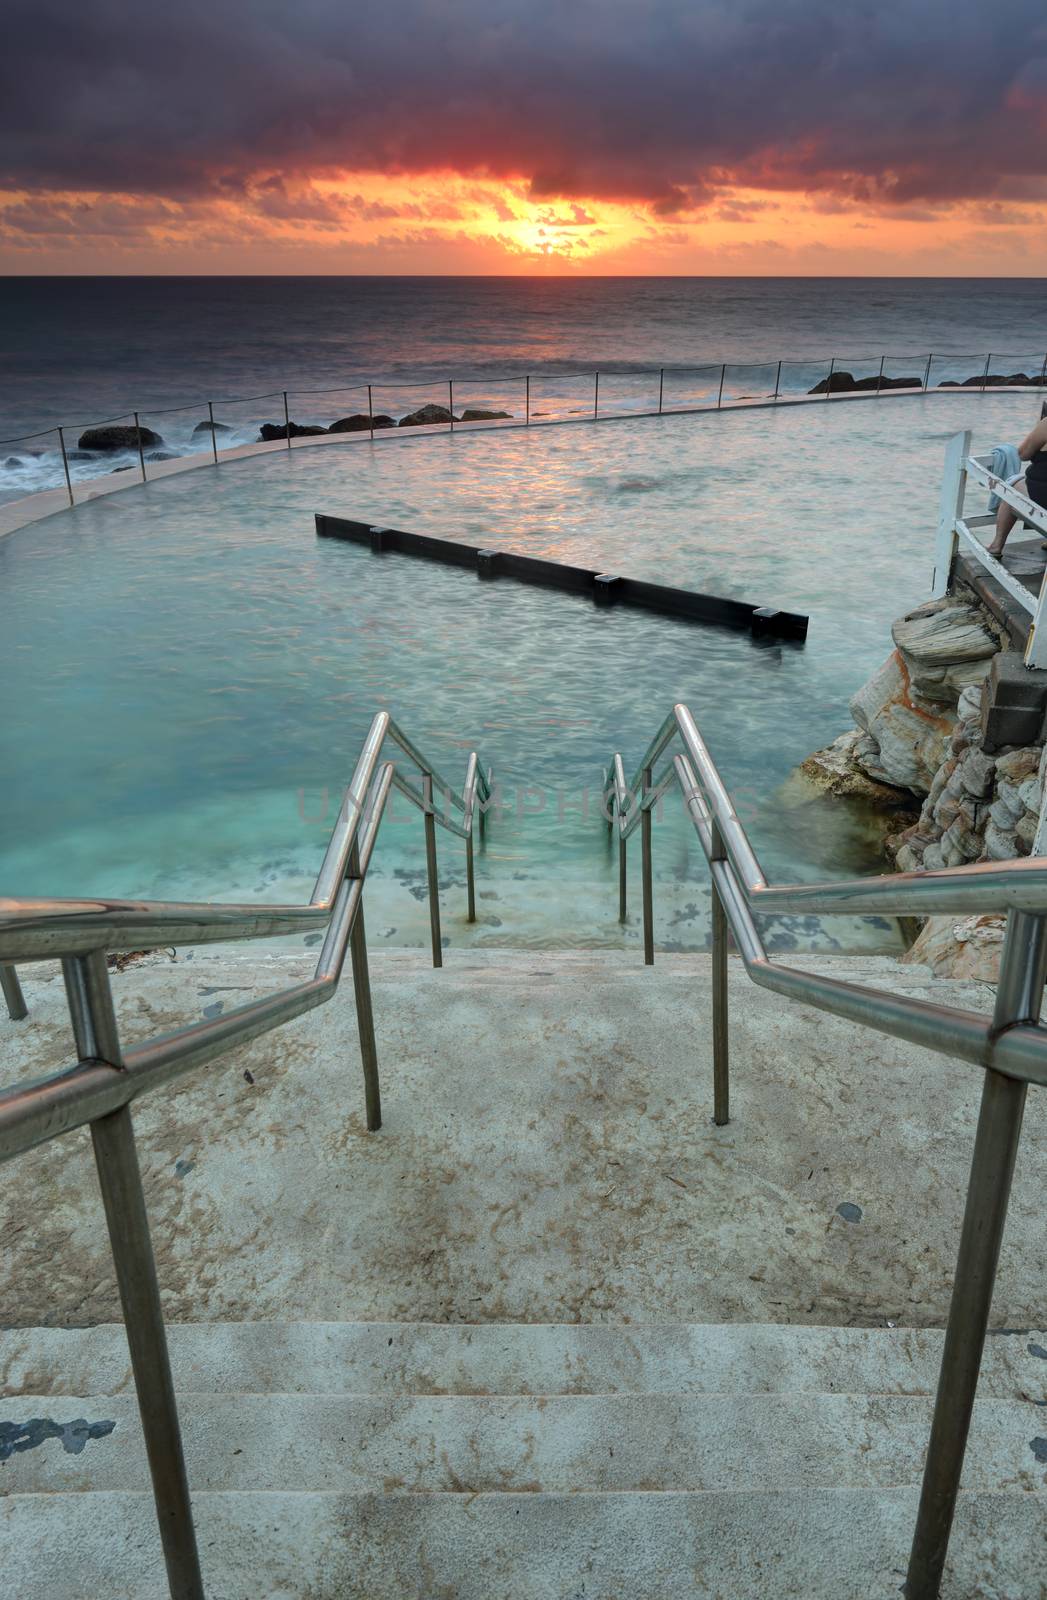 The steep steps leading down into Bronte Ocean Baths at the southern end of Bronte Beach, Sydney Australia.  The pool is built into the cliffs and has a unique kickboard for lap swimmers.The sun breaks free of clouds at sunrise casting a soft orange glow onto the clouds and across the ocean.